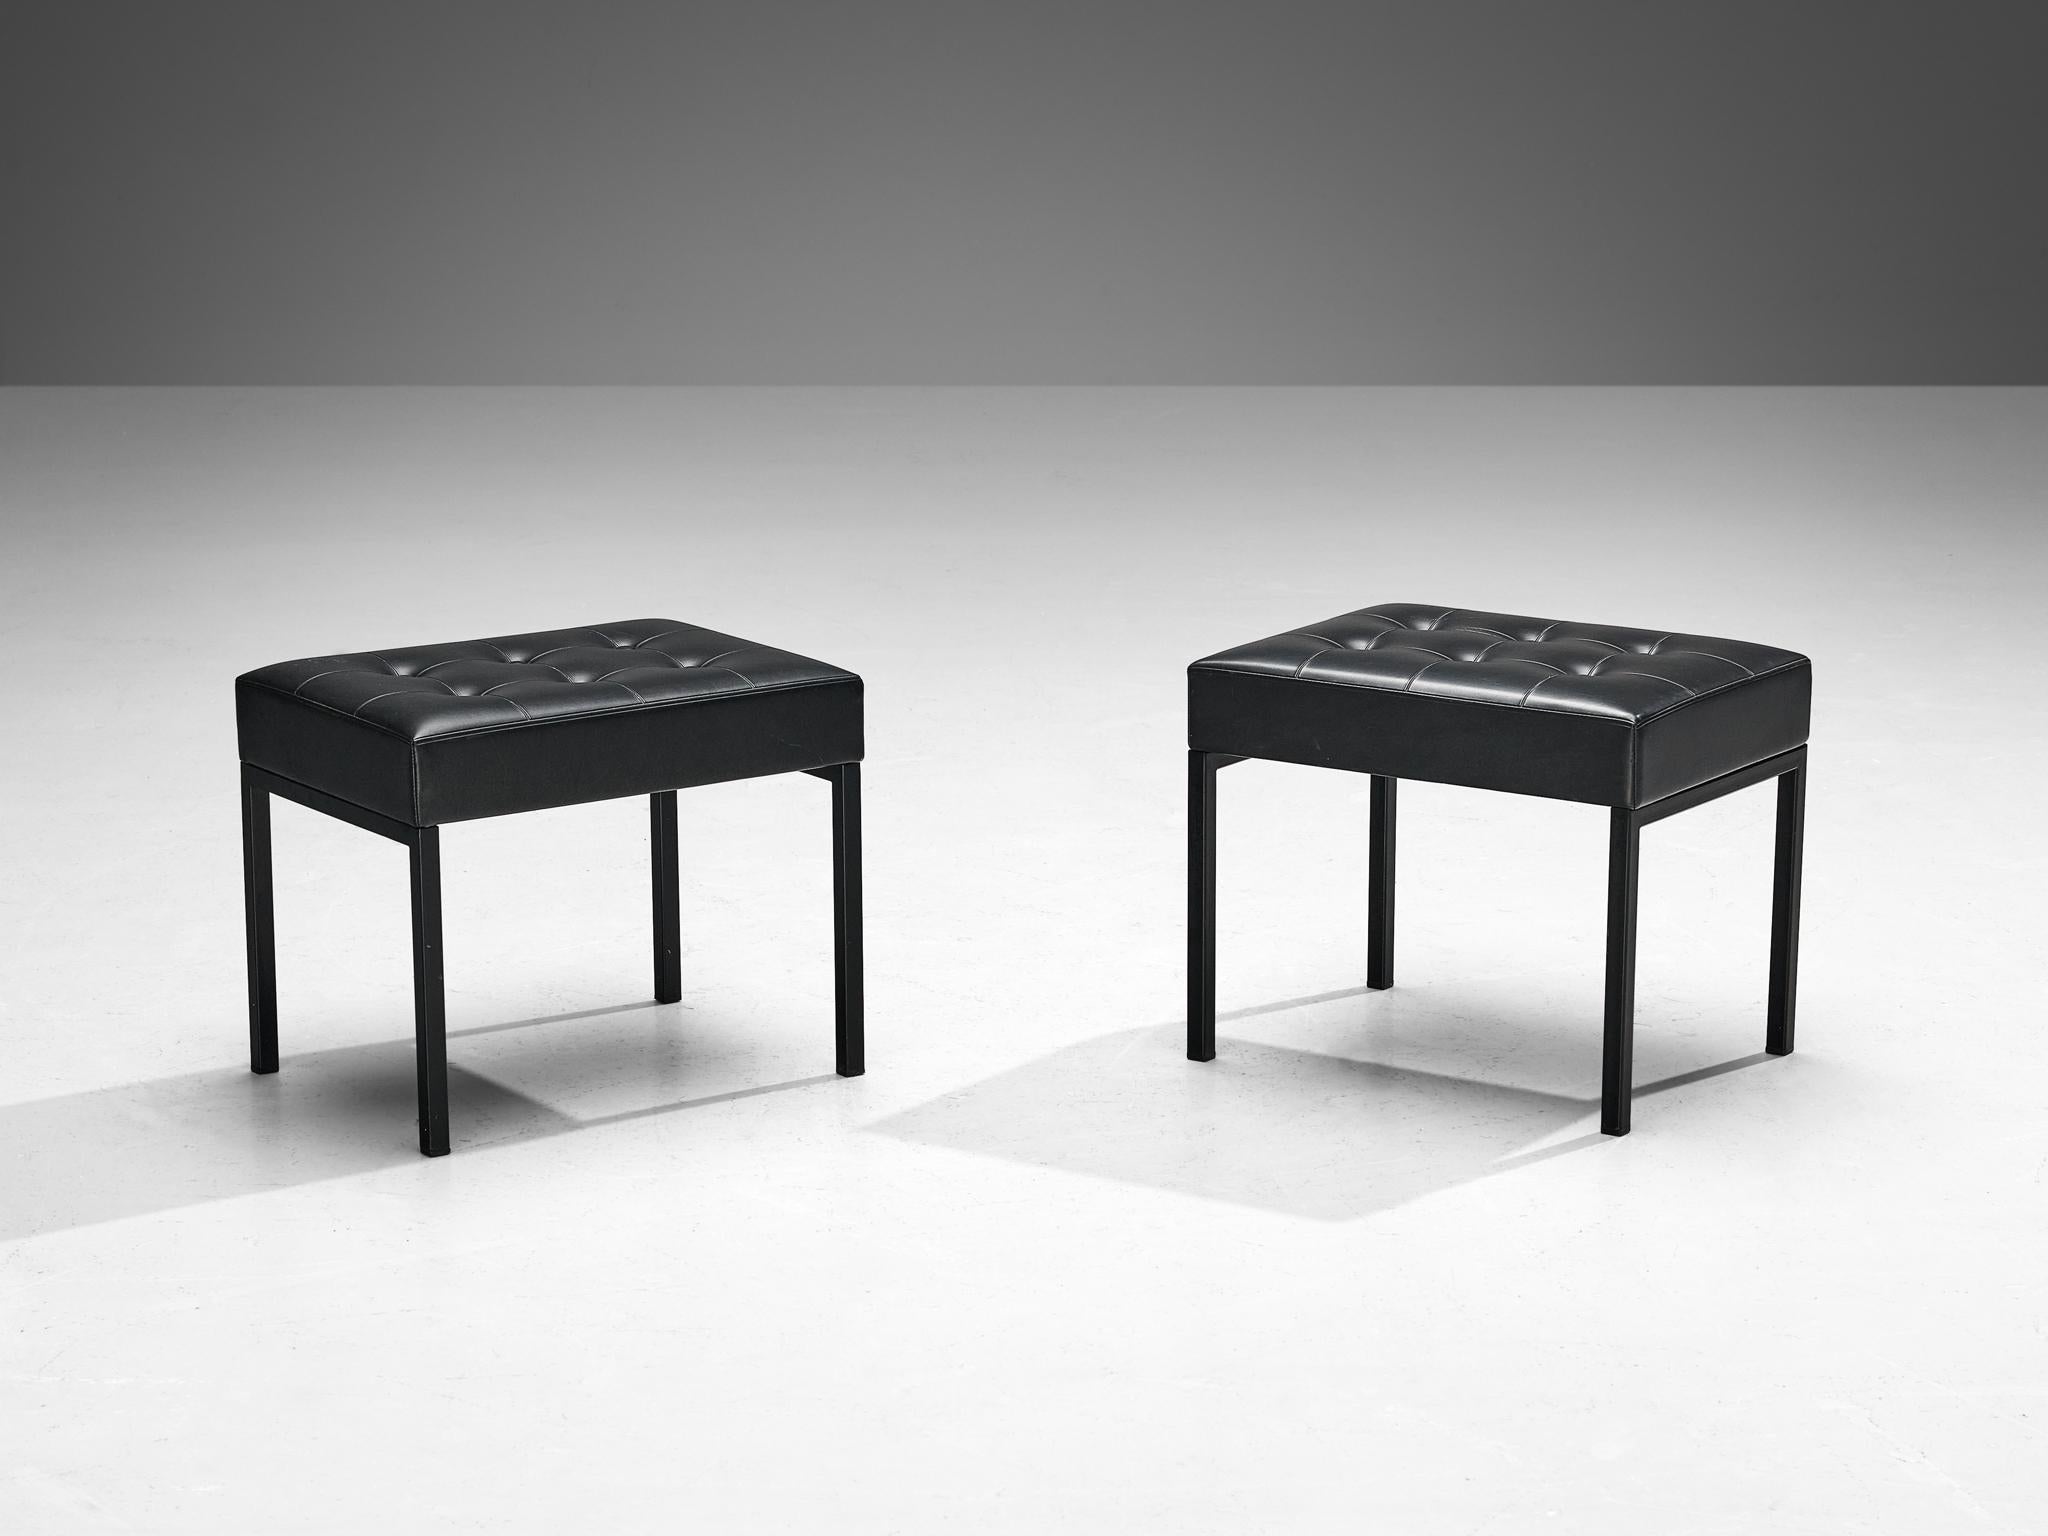 Stools in Metal and Black Upholstery